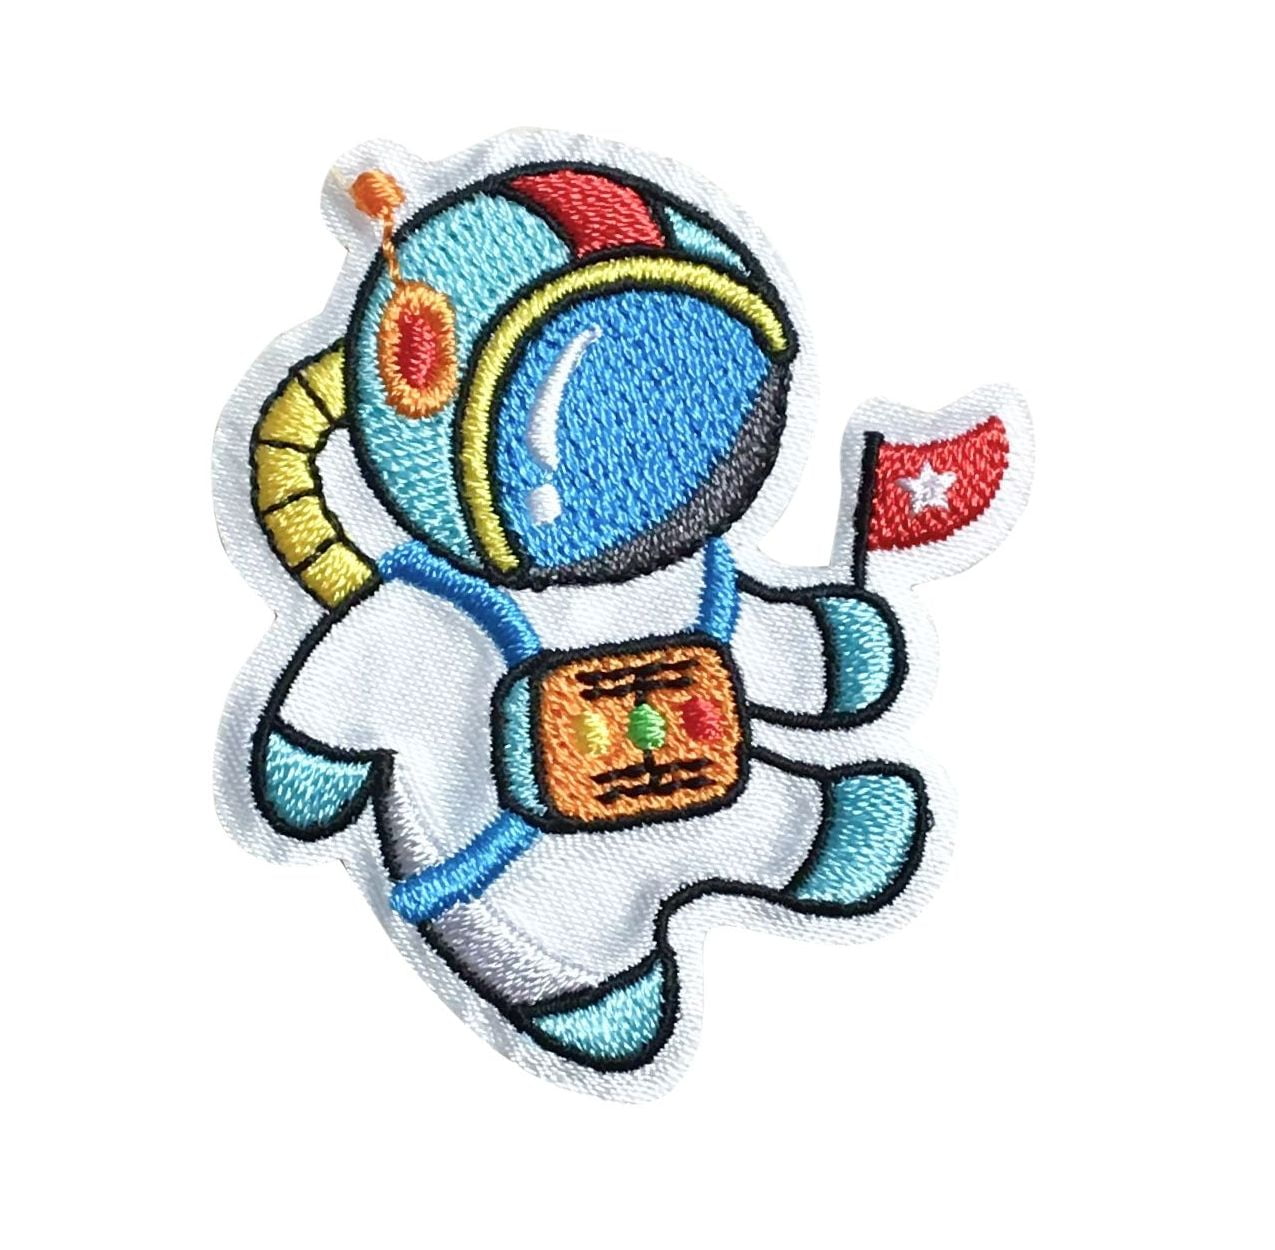 Iron-On Embroidered Patch Astronaut Space Man Patch White & Orange Astronaut Space Man Childs Iron On Clothing Patch